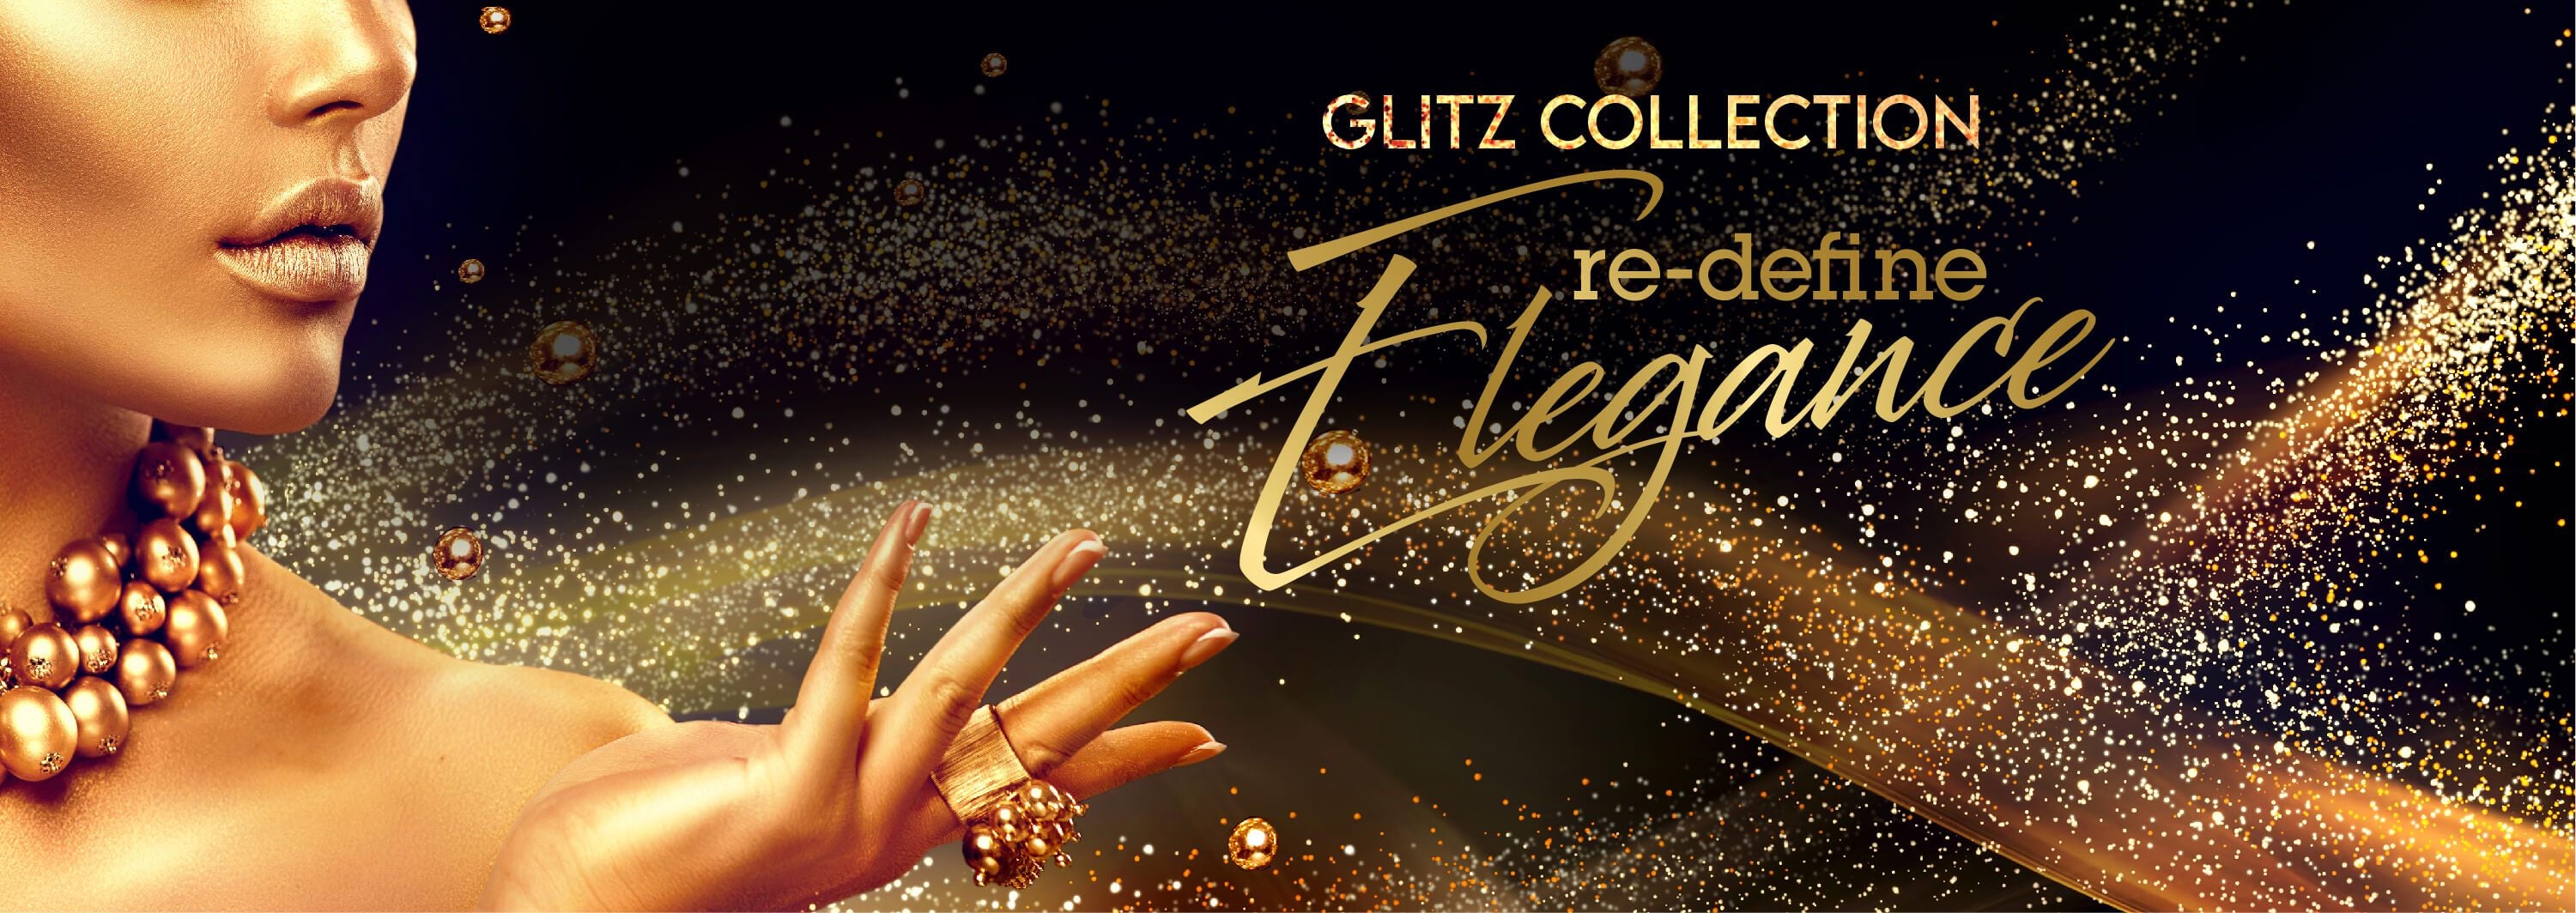 The Glitz Collection - Christmas Gel Nails